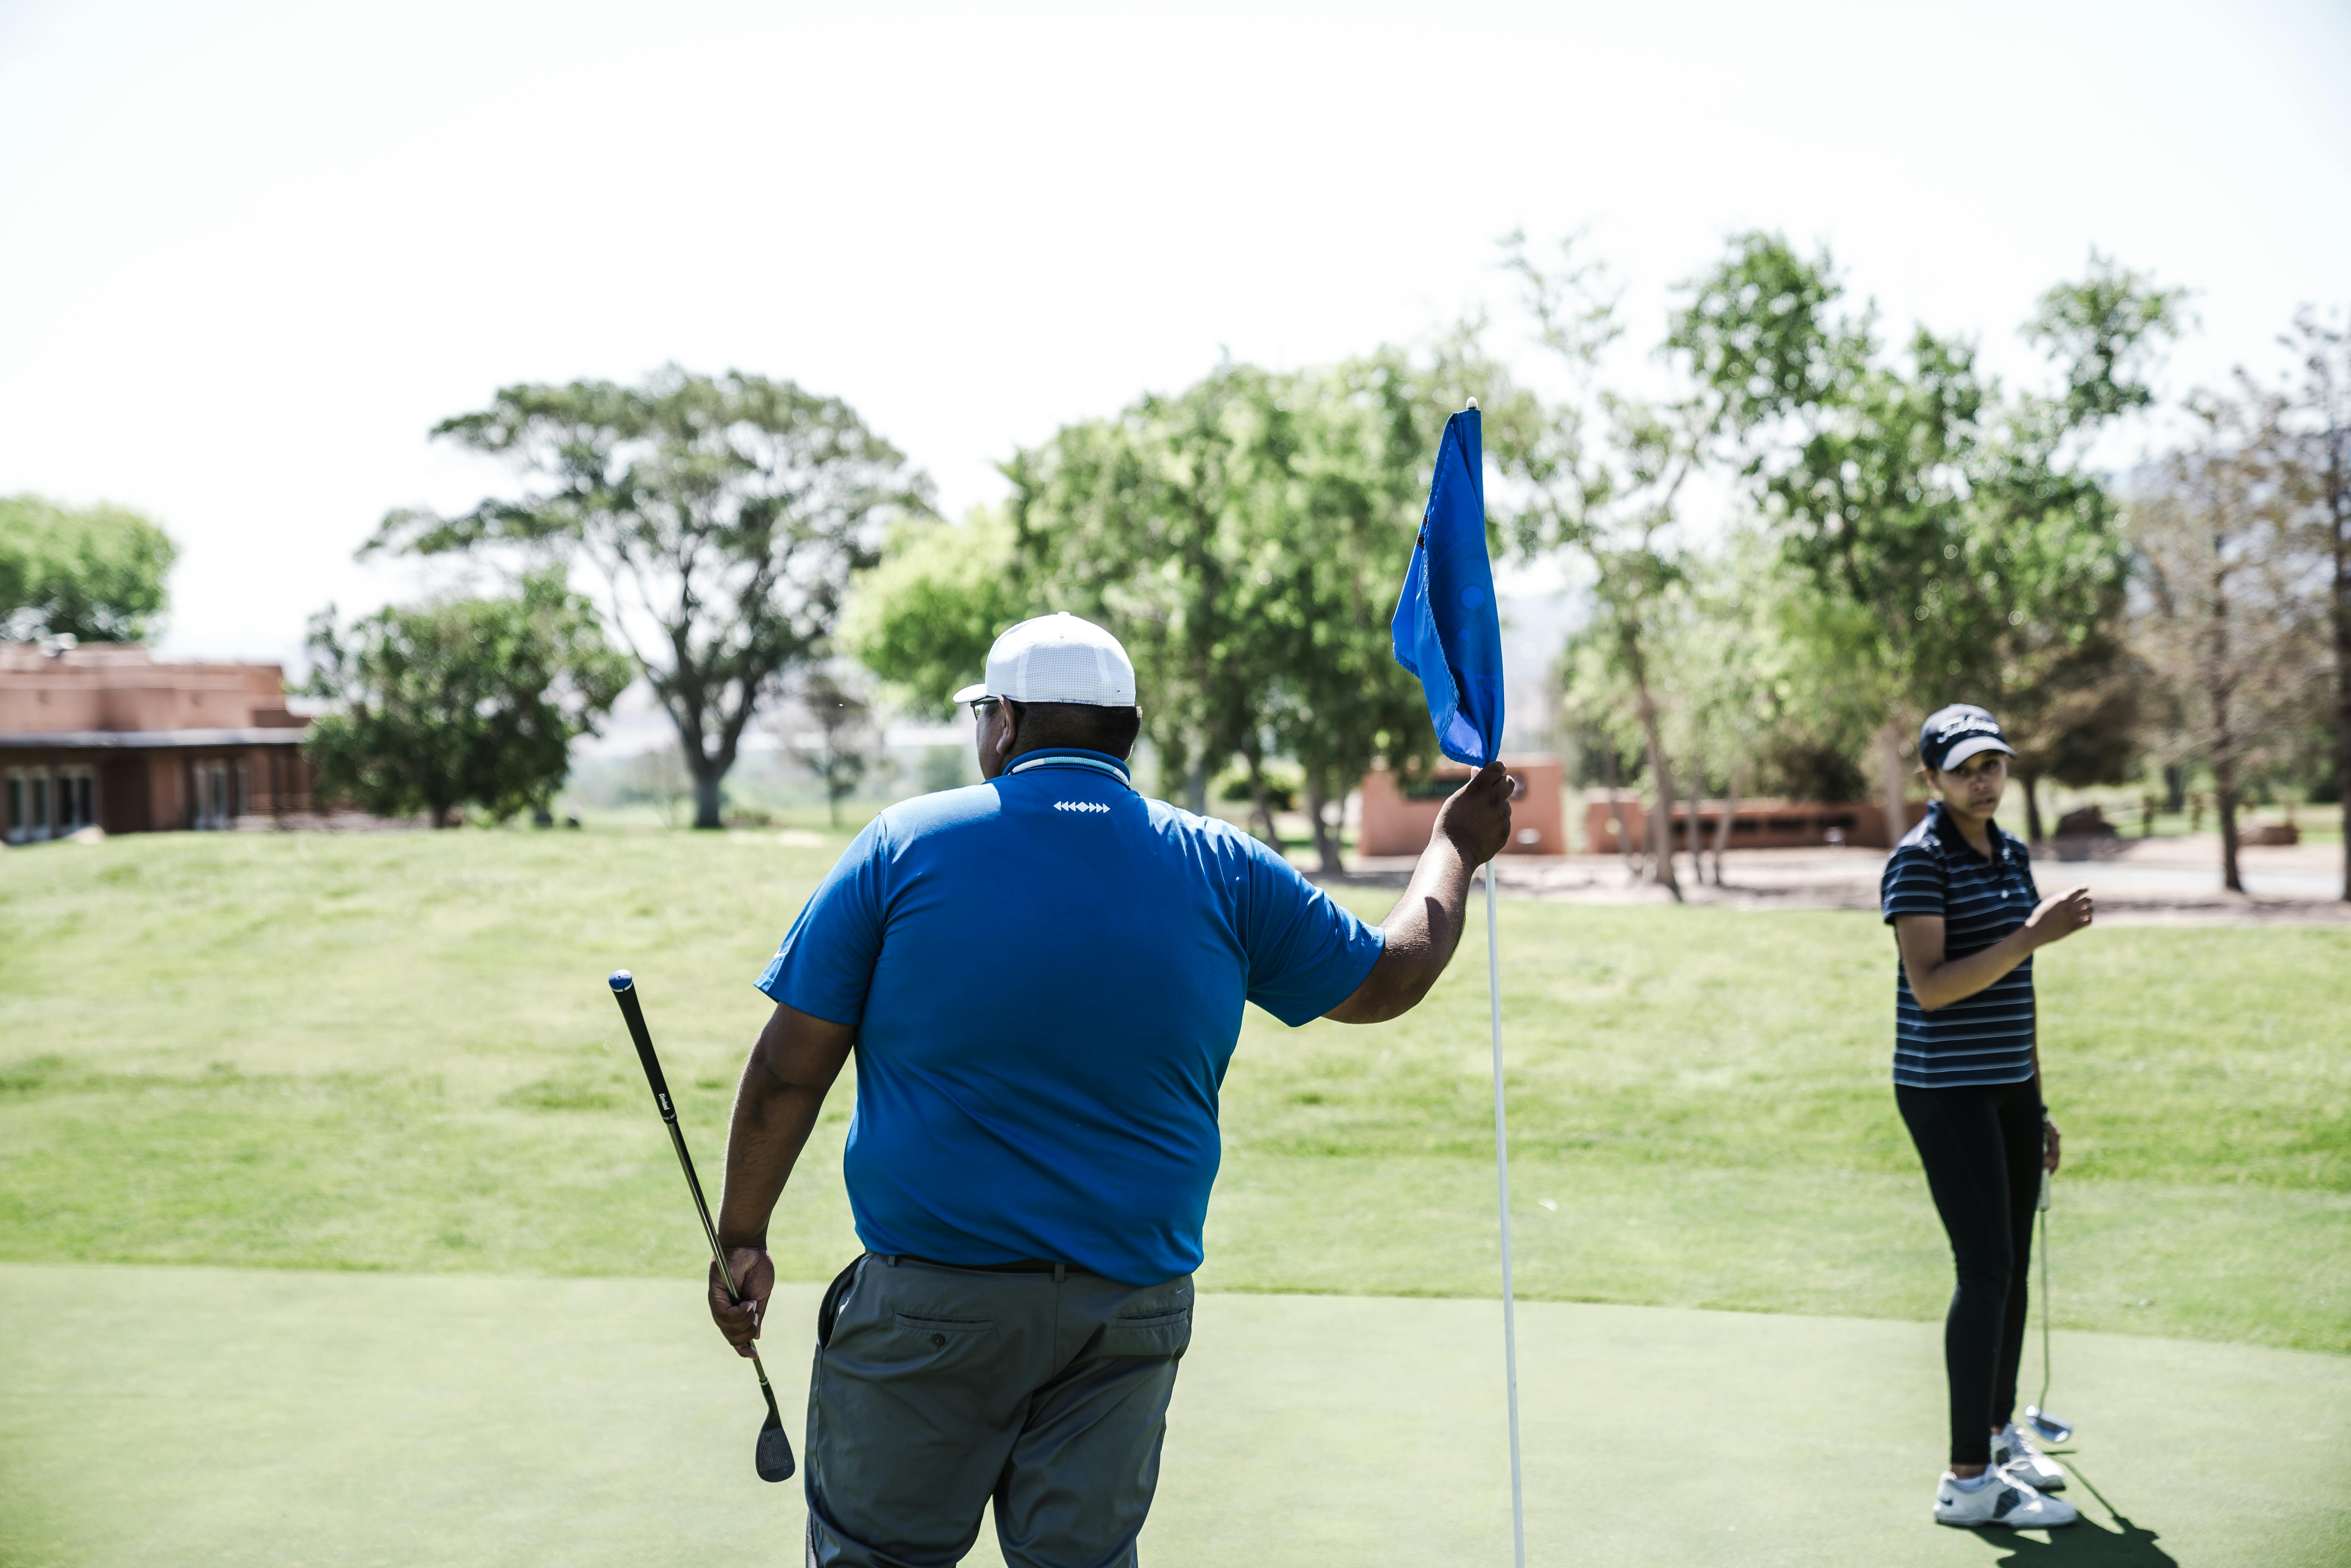 person holding blue flaglet holding golf driver